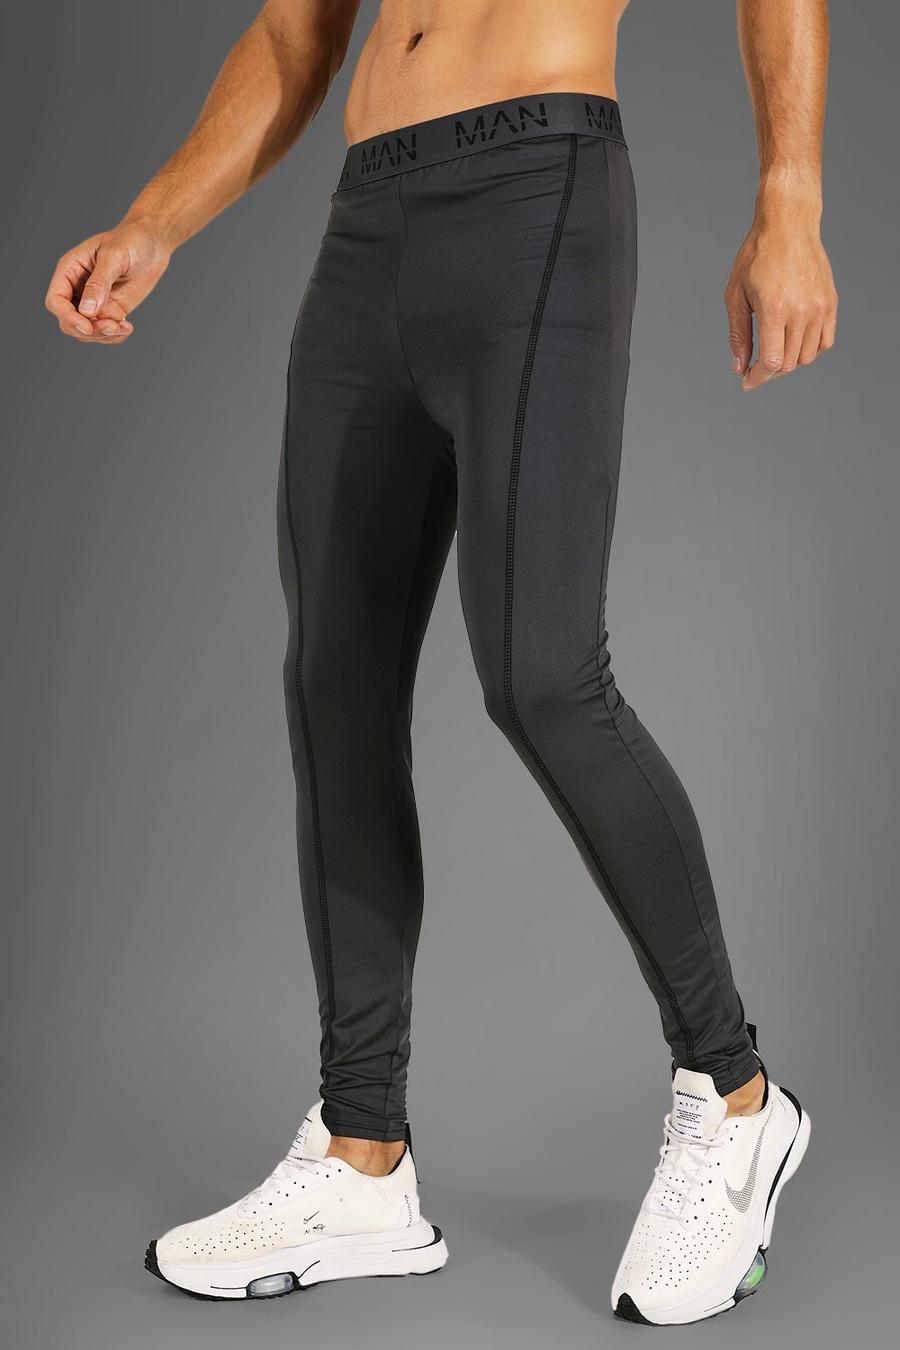 Charcoal grey Tall Man Active Gym Compression Leggings